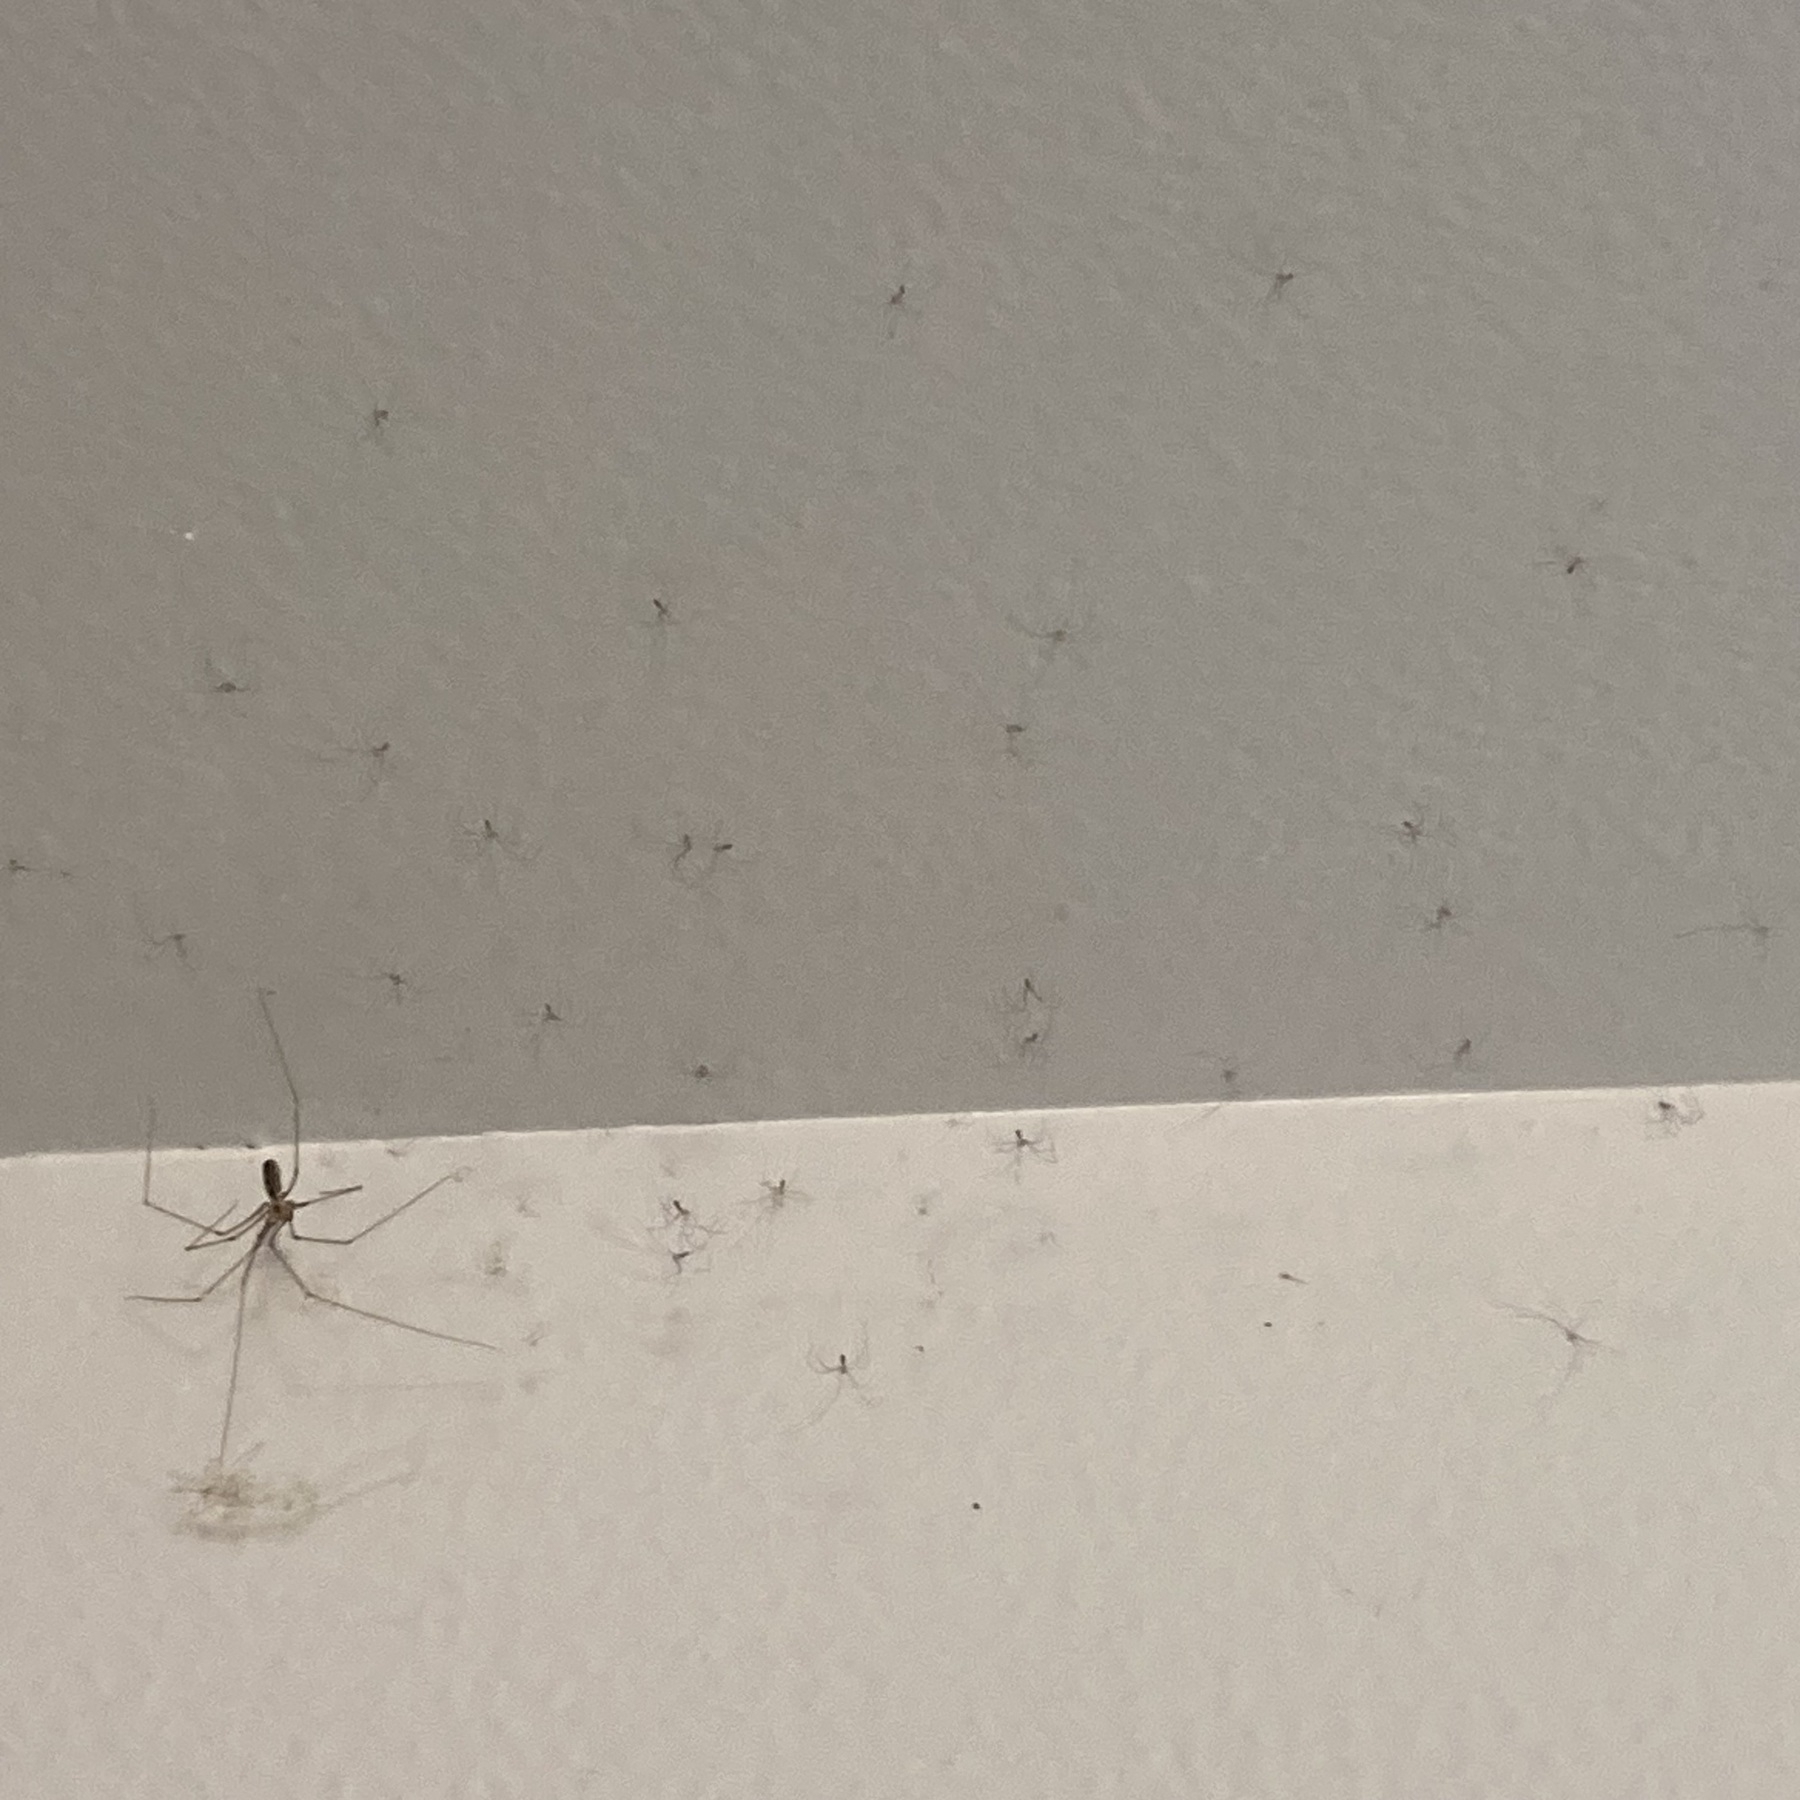 Big spider with lots of babies. 